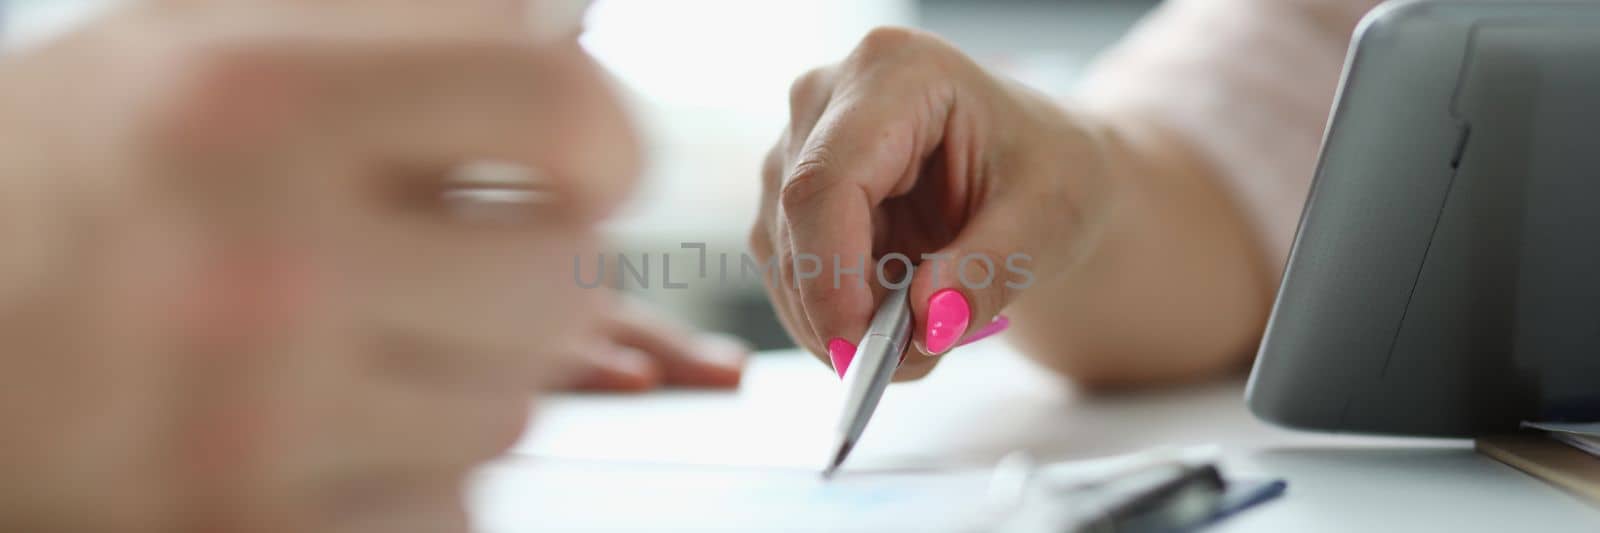 Business people write and discuss documents with tablet computer on table. Signing of insurance documents and contracts